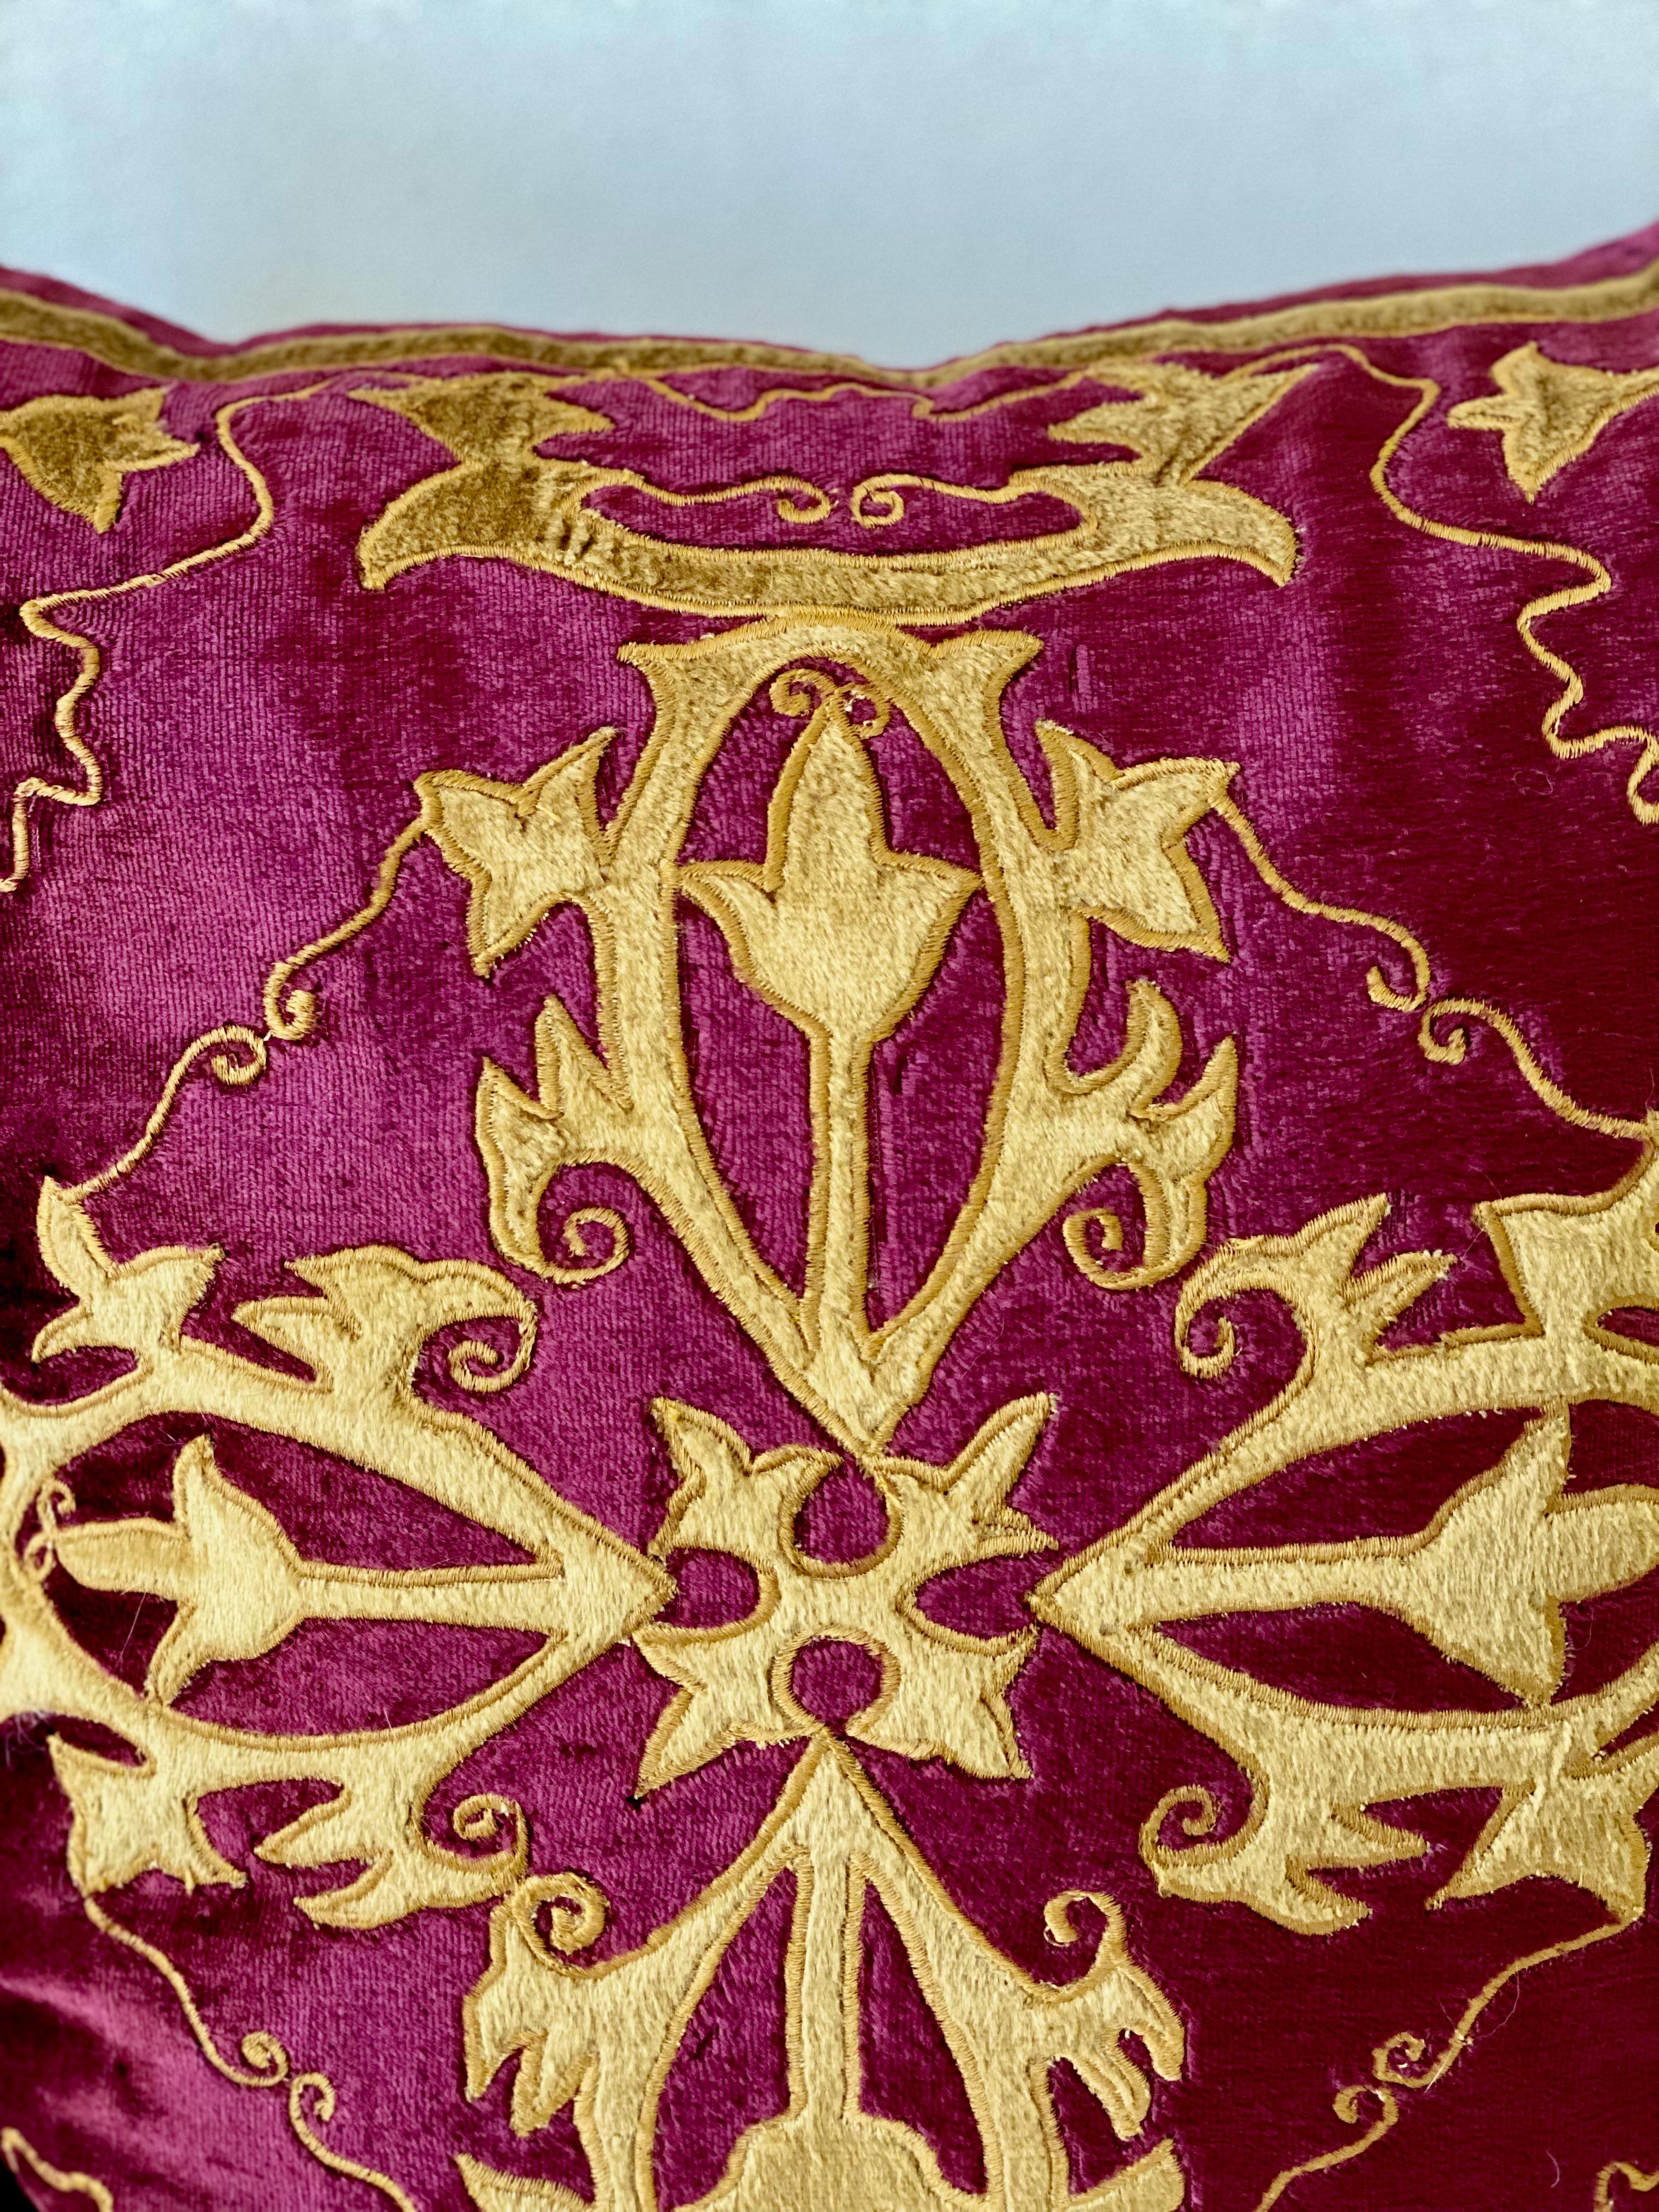 Baroque Revival Baroque Style, Red and Gold Velvet Pillow, Elaborate Applique Work